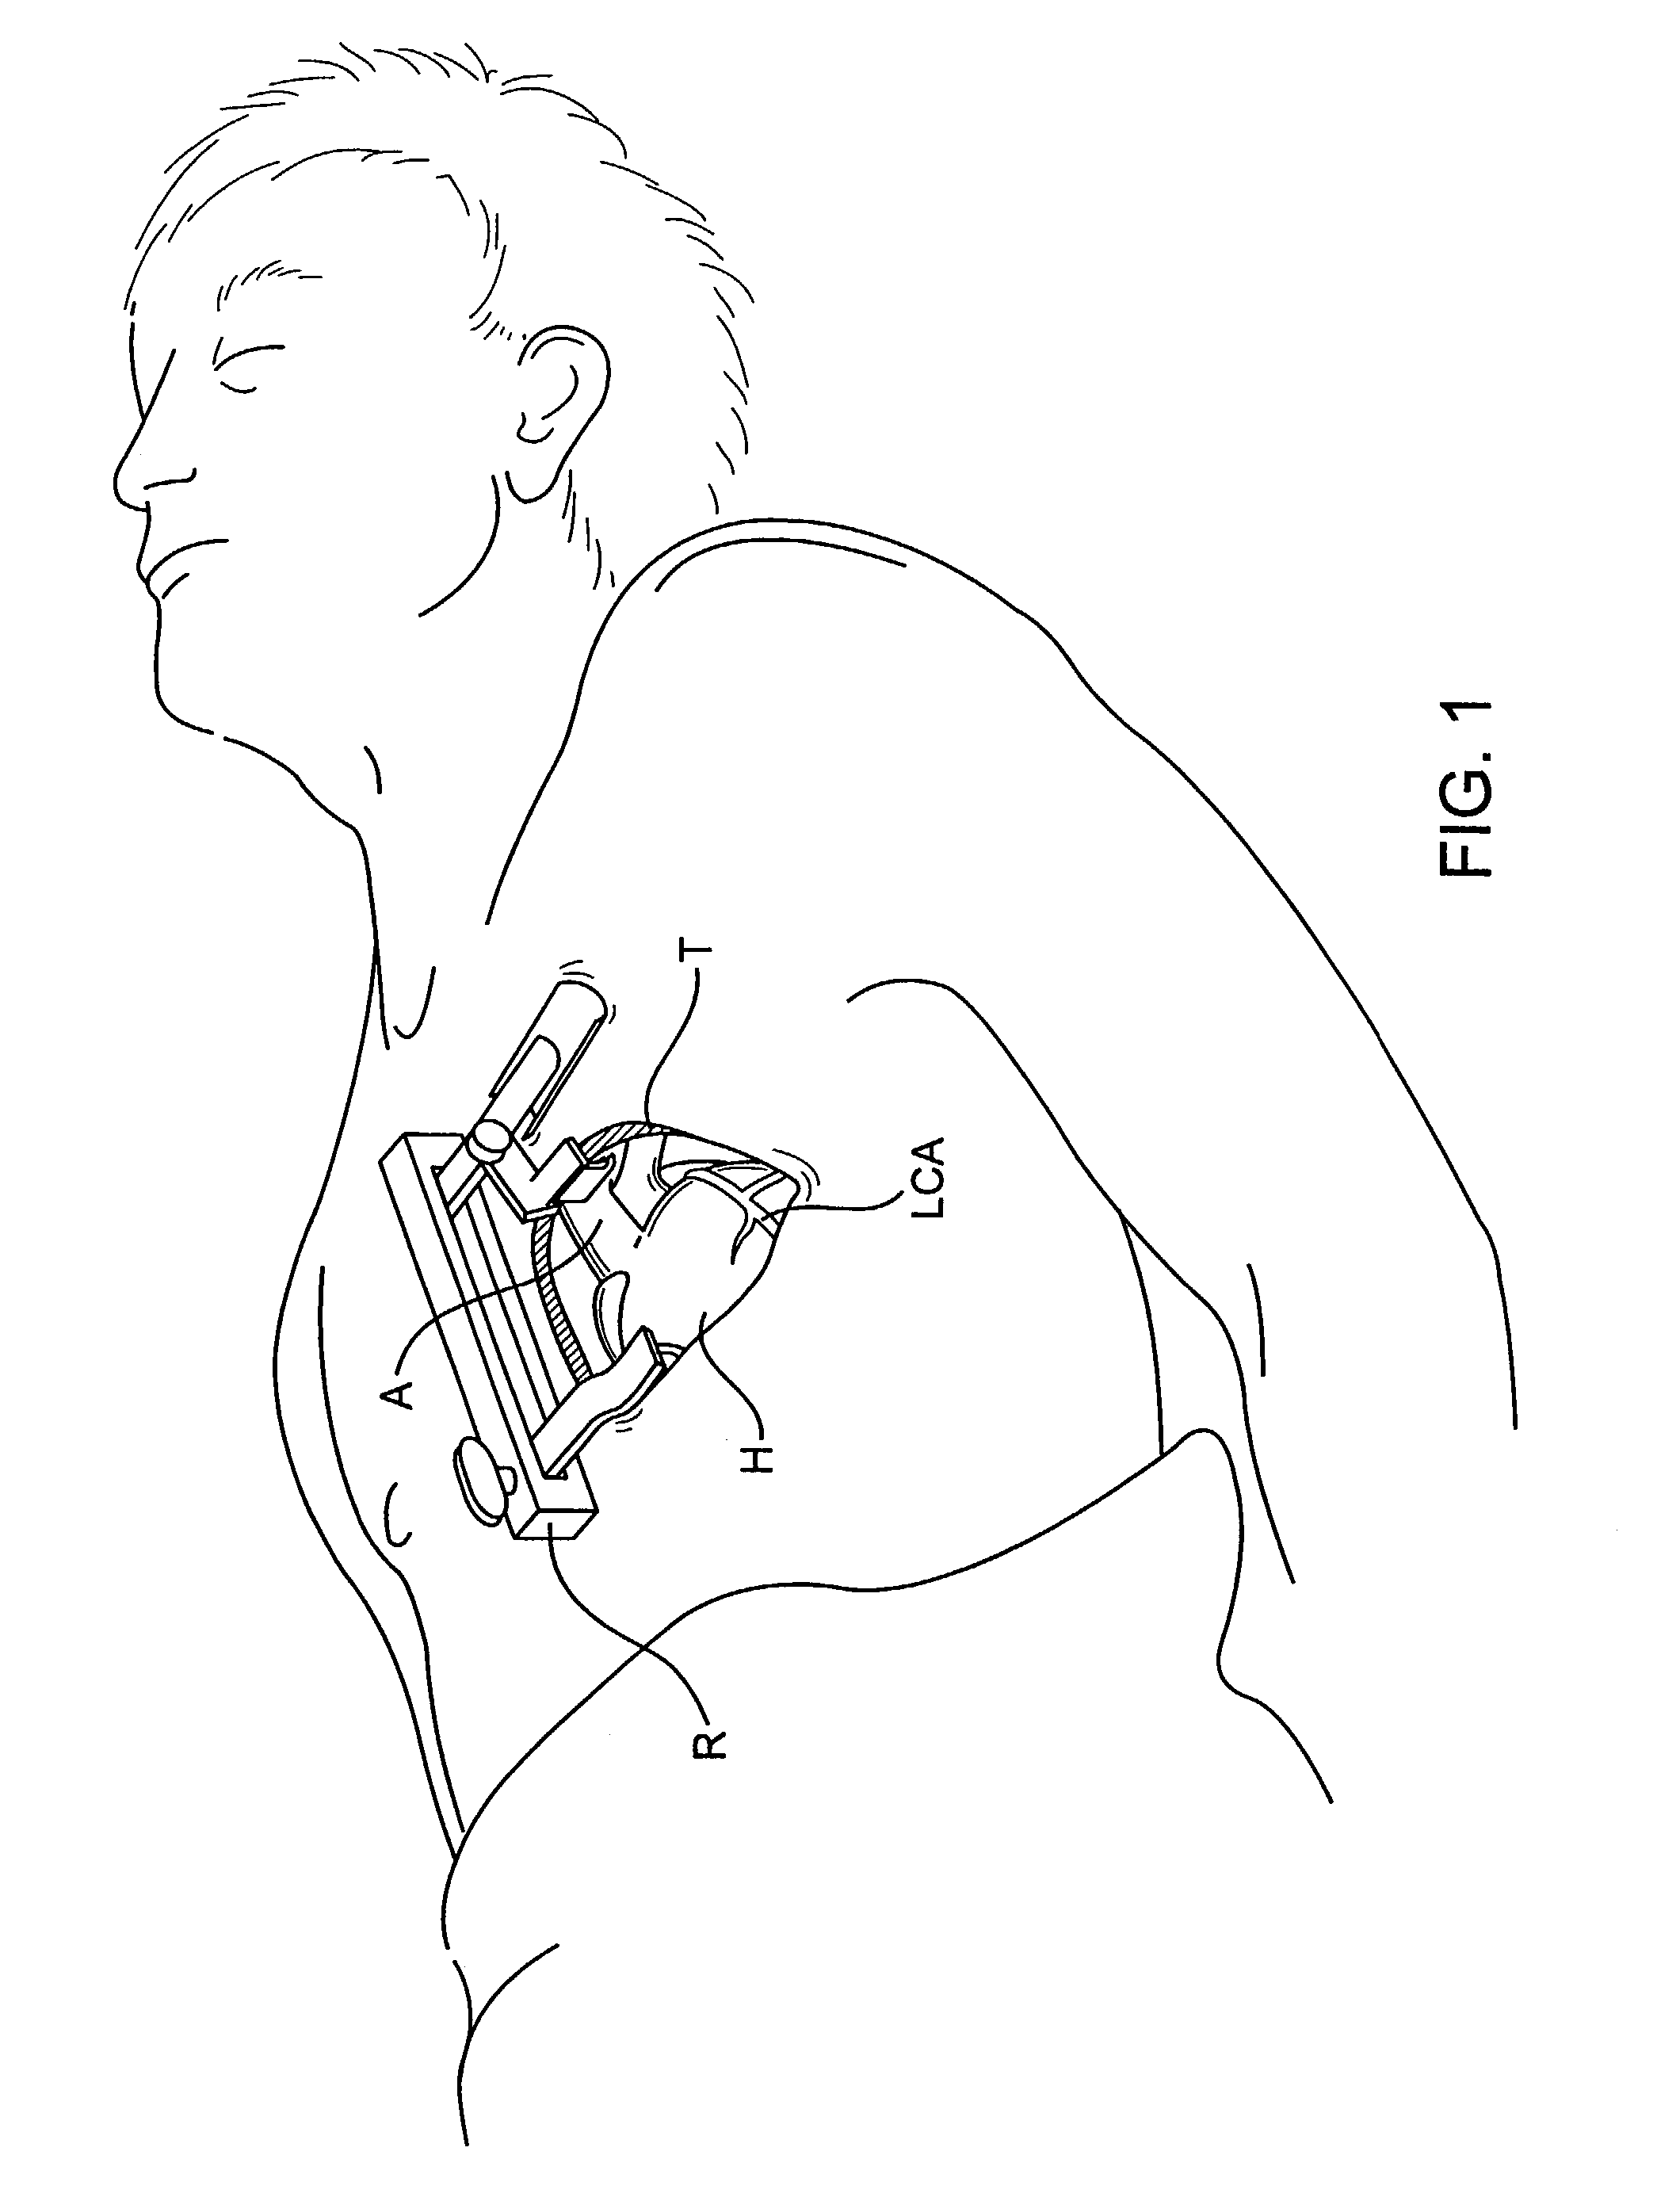 Delivering a conduit into a heart wall to place a coronary vessel in communication with a heart chamber and removing tissue from the vessel or heart wall to facilitate such communication